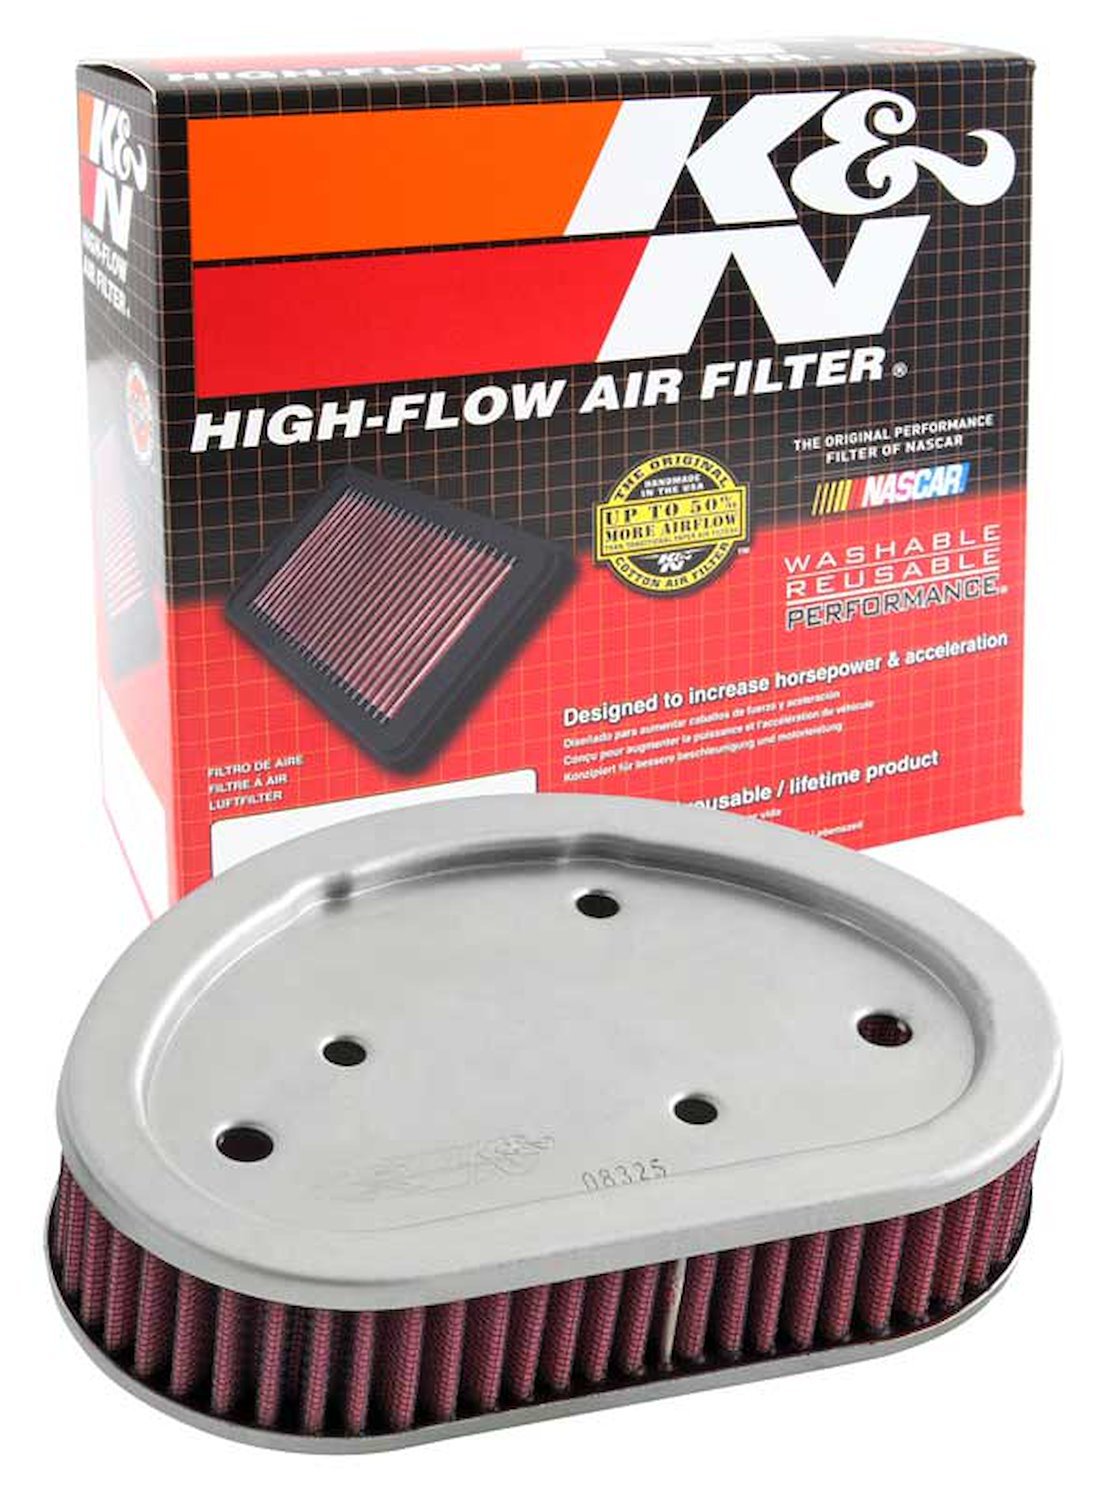 High-Performance Replacement Air Filter 2008-2013 Harley Davidson FX Models